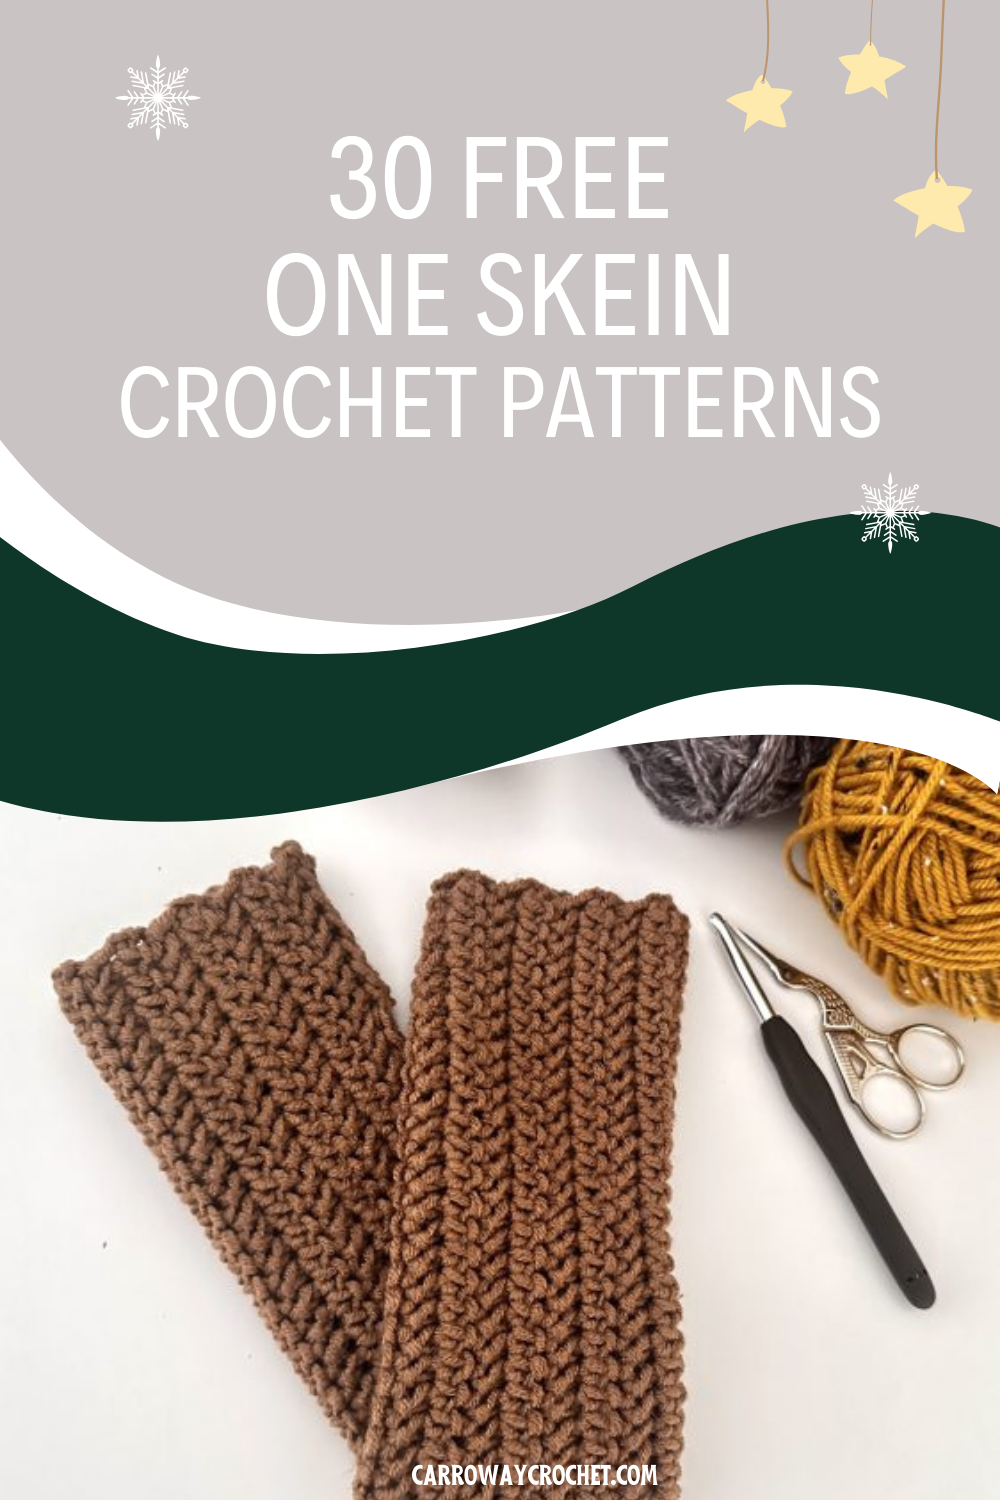 14 One-Skein Crochet Projects - Made with a Twist